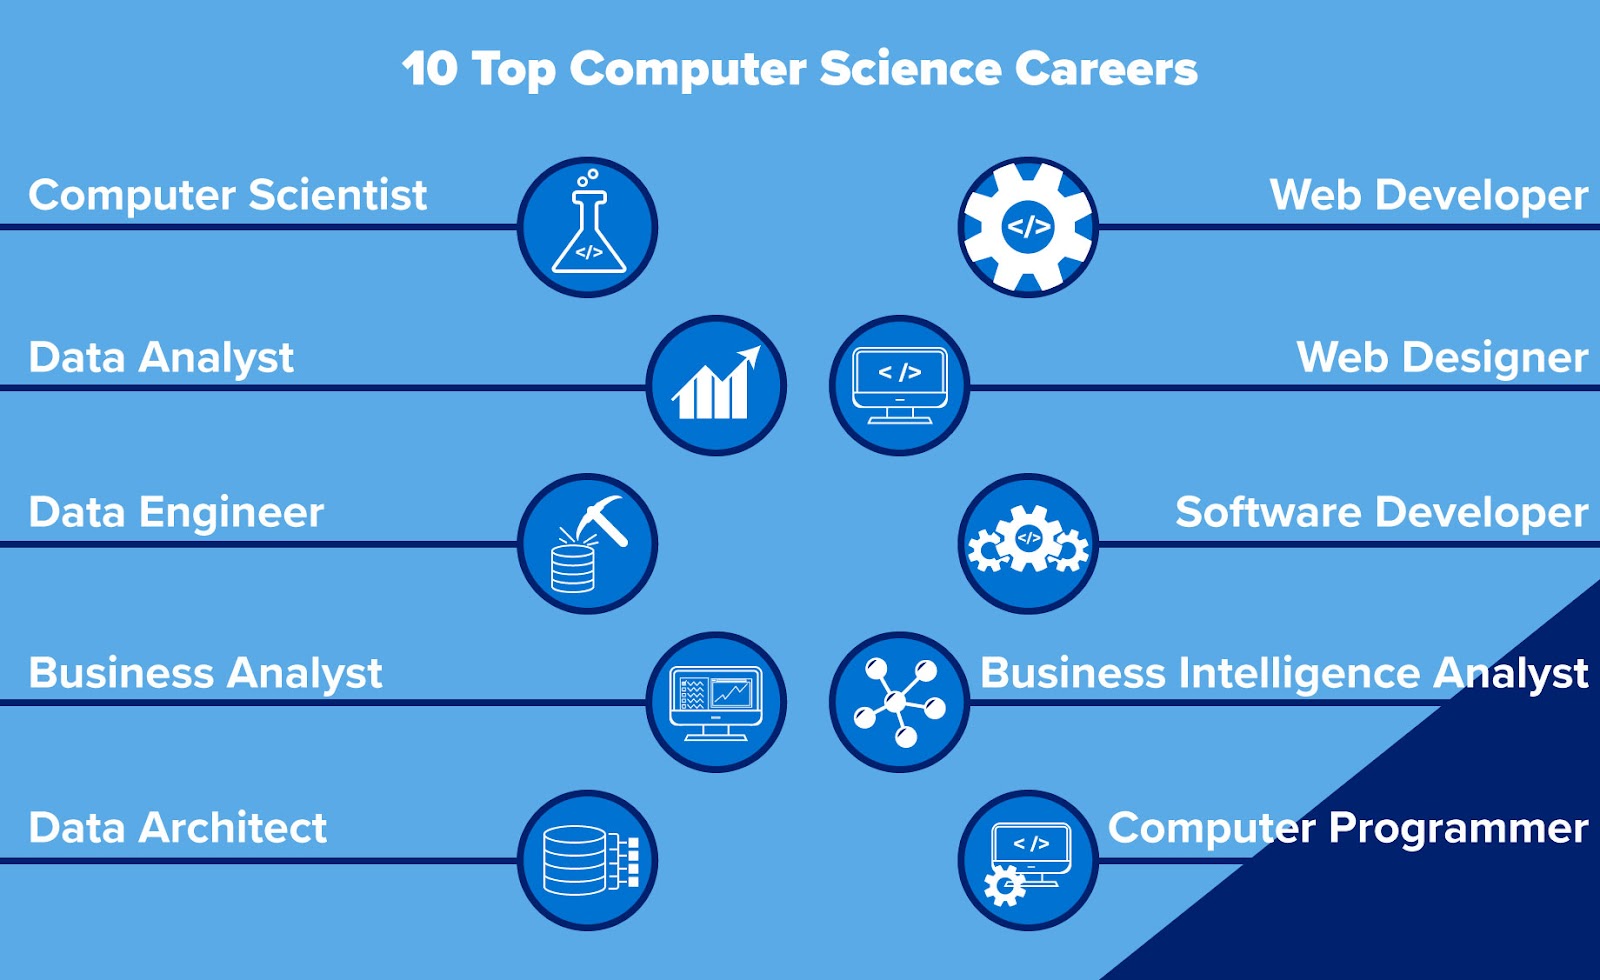 An image listing a number of possible computer science careers one can pursue.